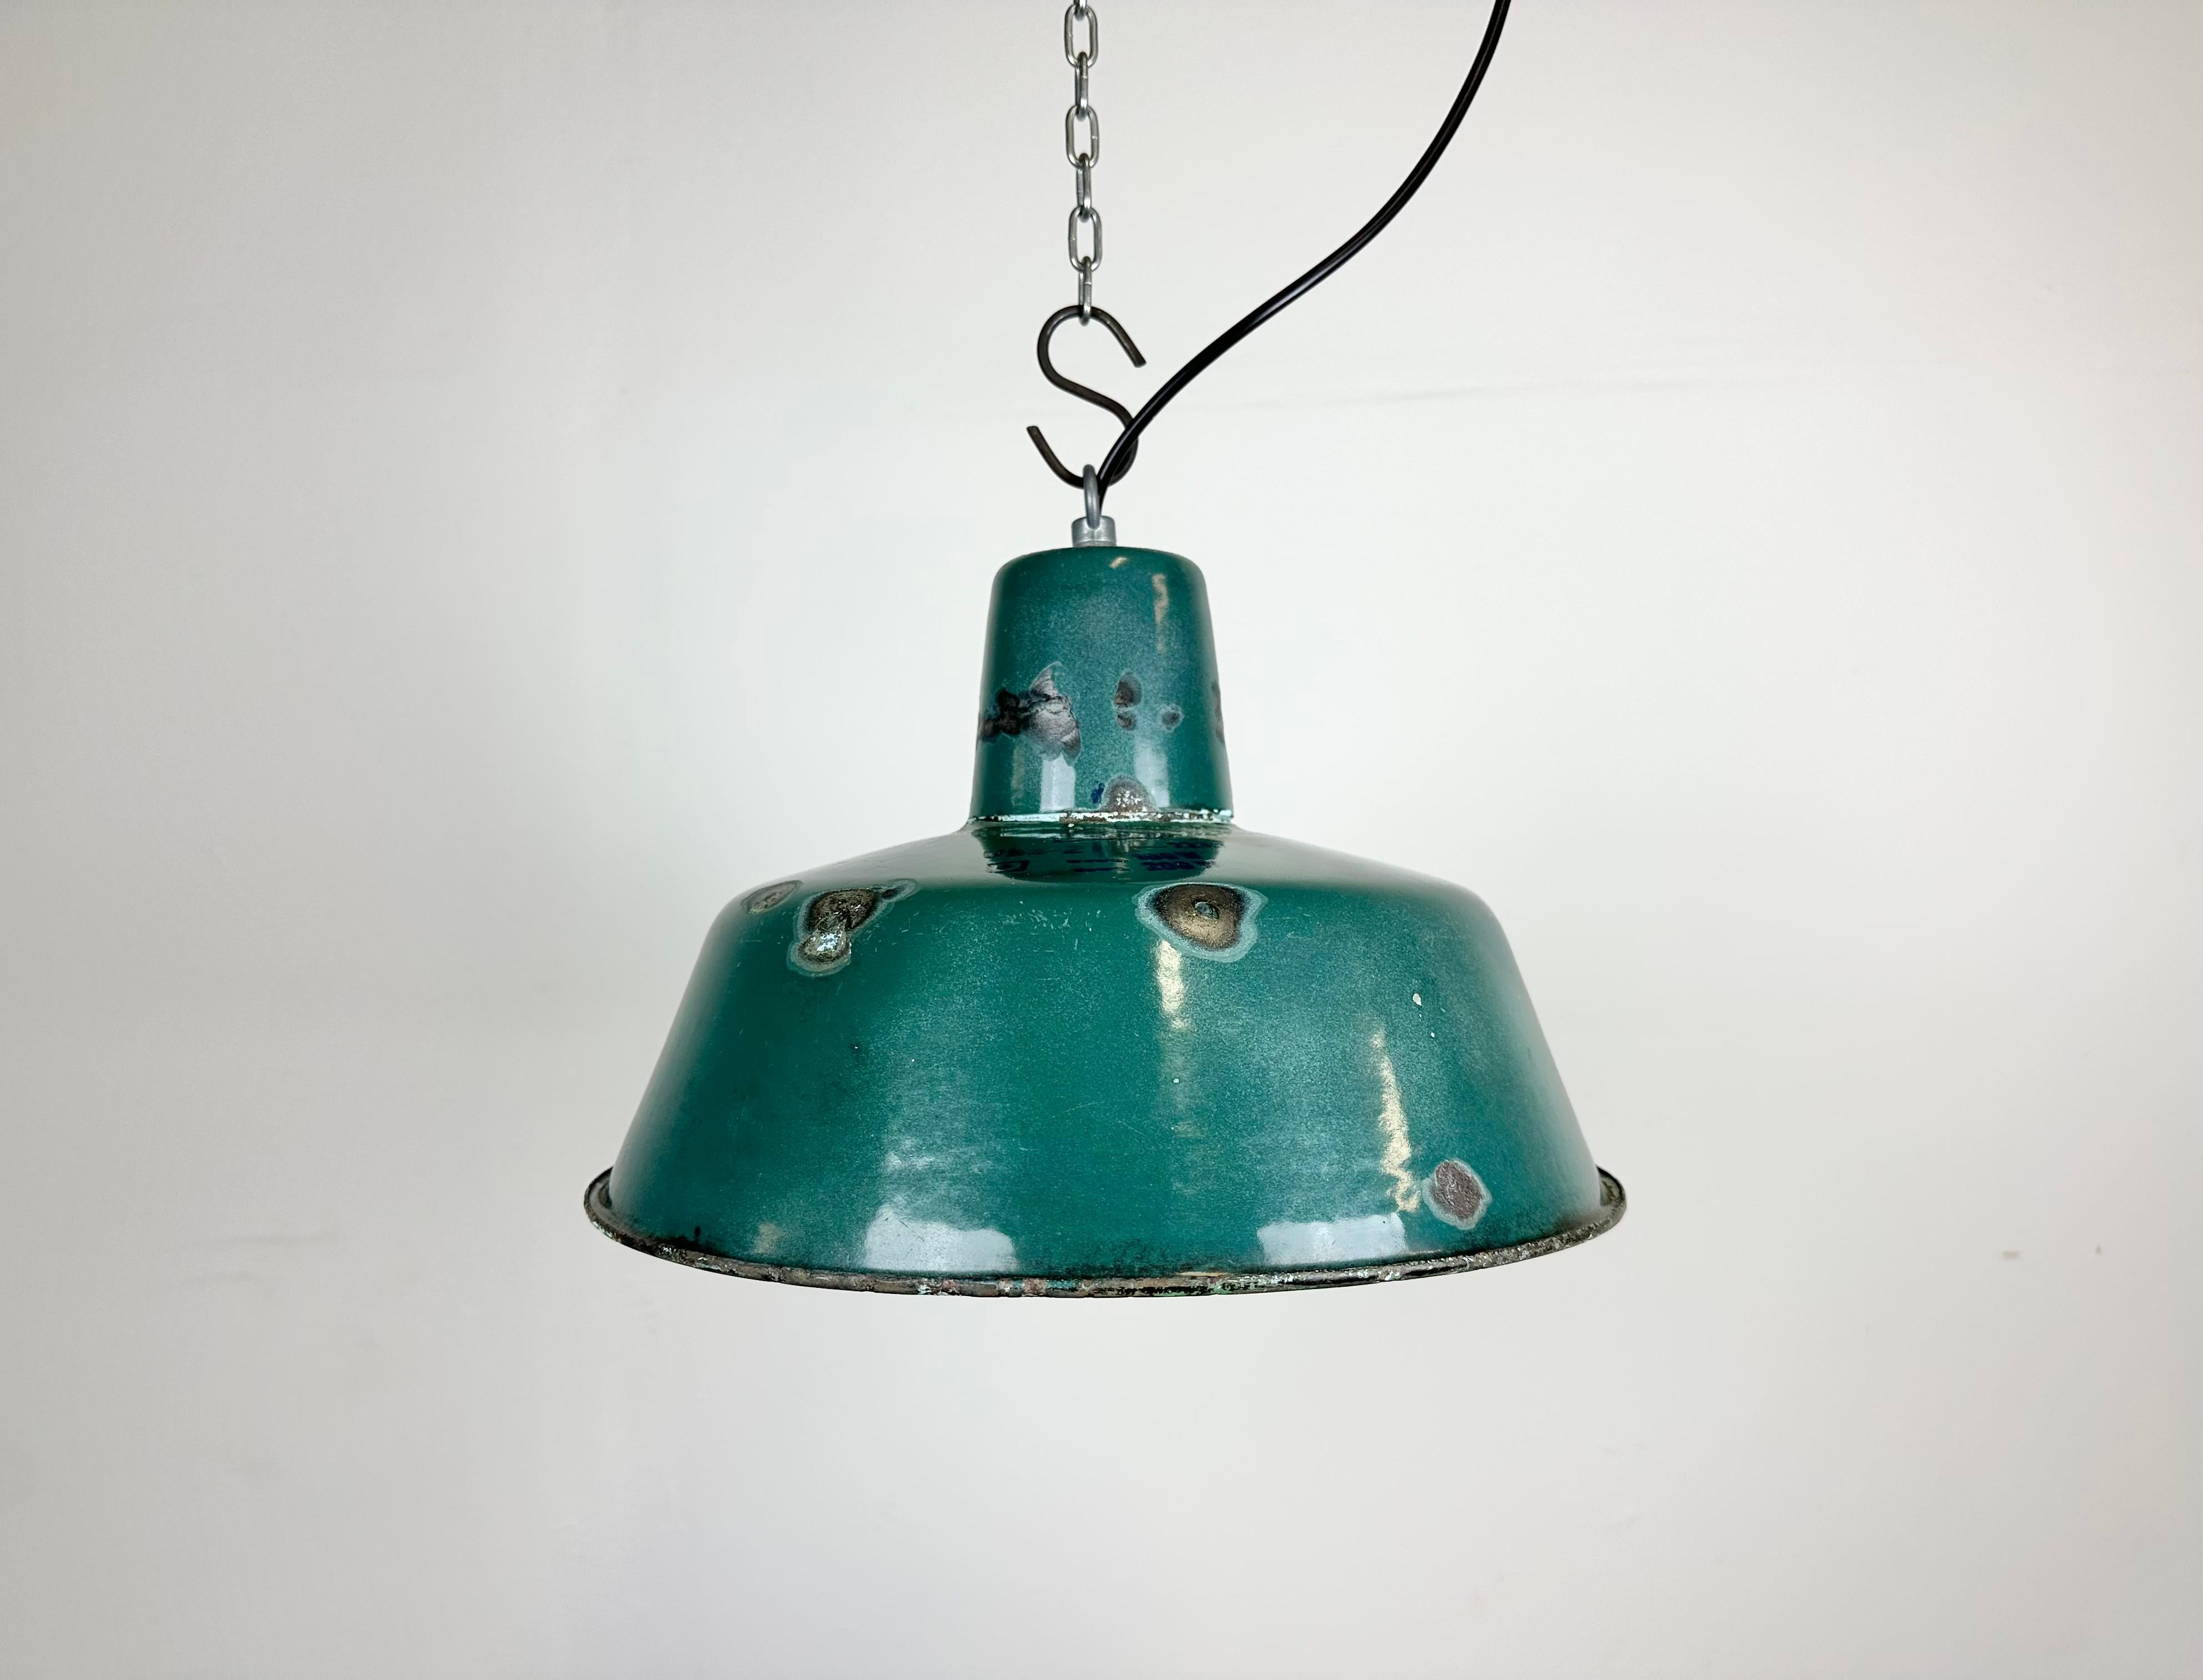 Industrial green enamel pendant light made in Poland during the 1960s. White enamel inside the shade. Iron top. The porcelain socket requires E 27/ E 26 light bulbs. New wire. Fully functional. The weight of the lamp is 1,2 kg.